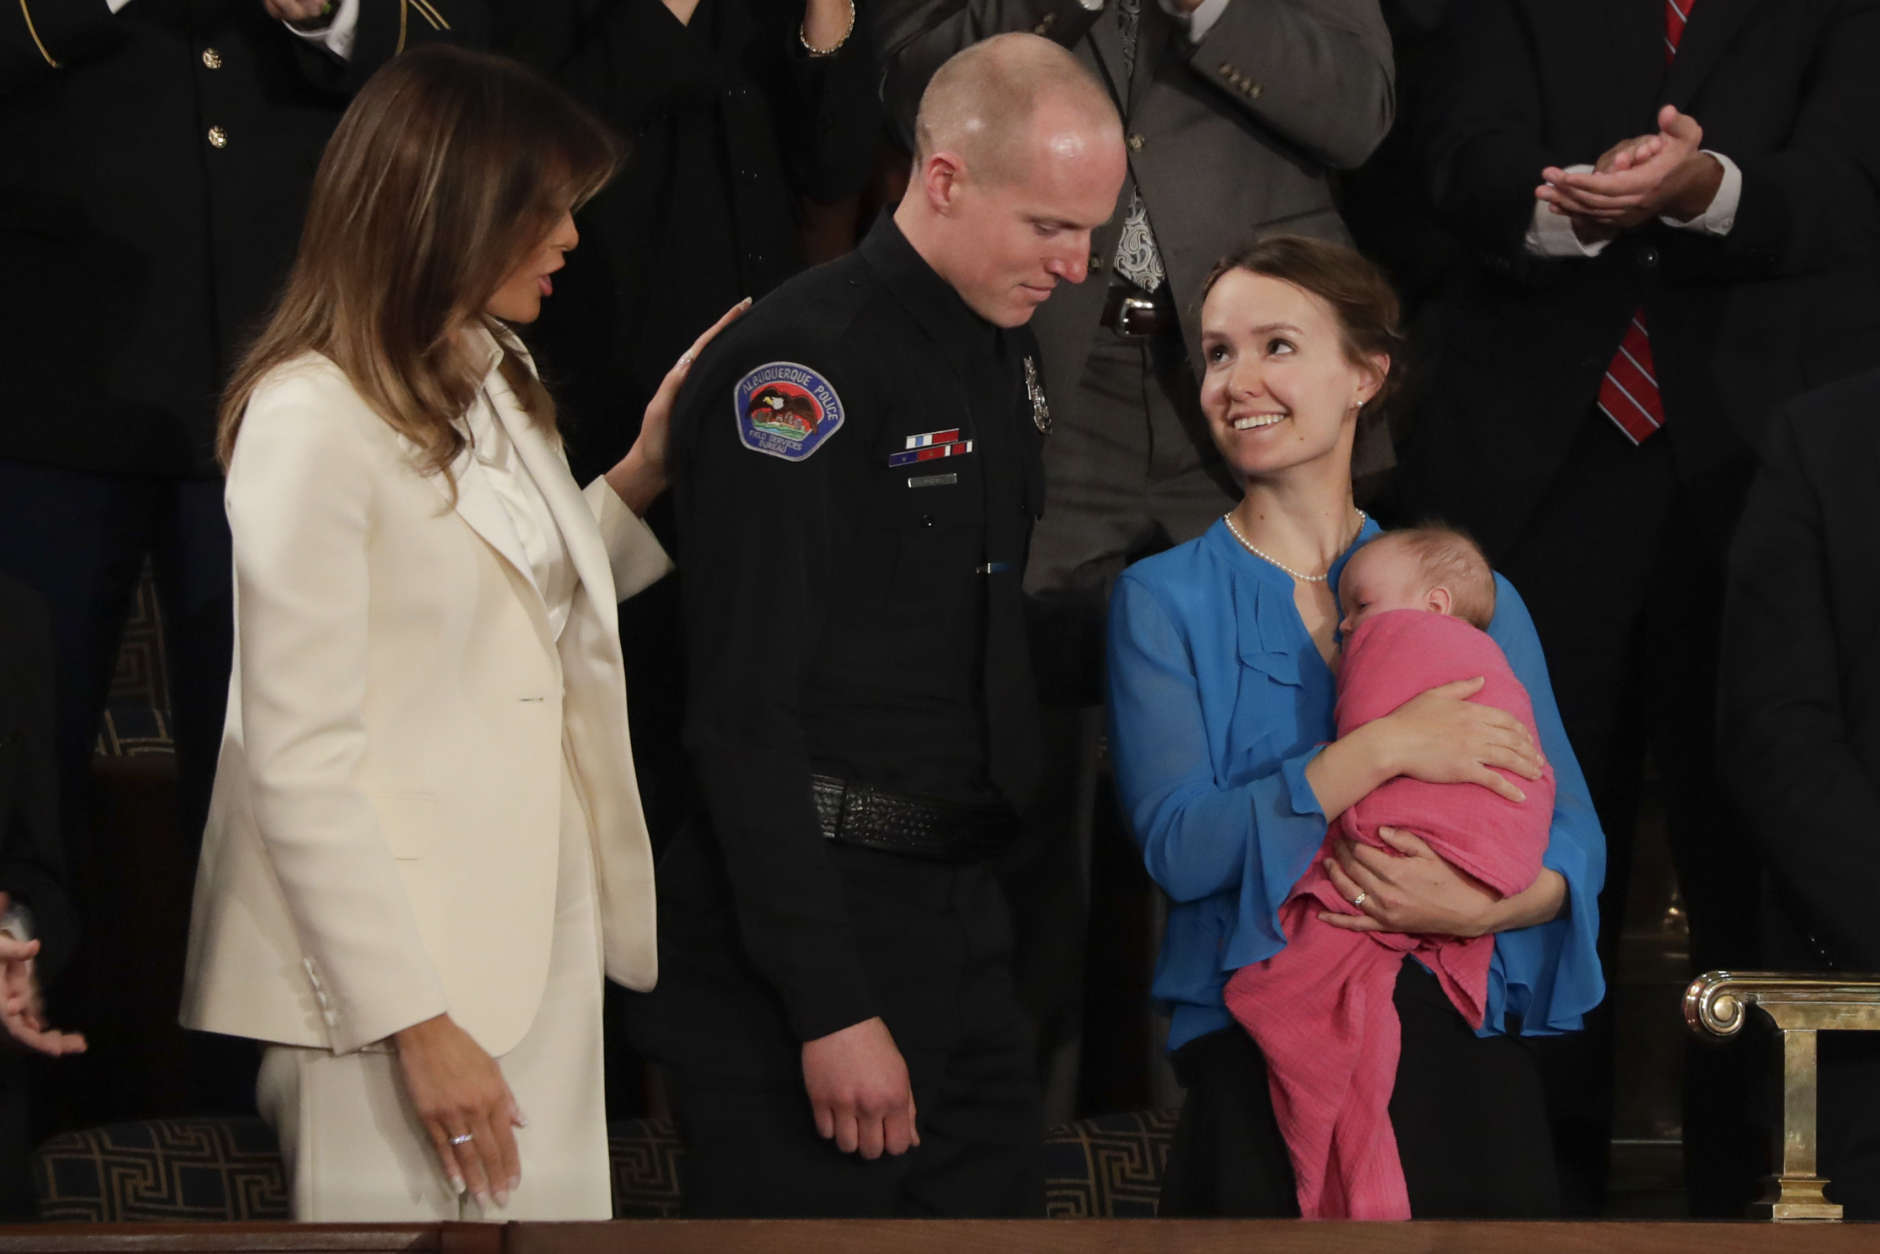 Rebecca Holets looks up at her husband Albuquerque Police Officer Ryan Holets after their introduction by President Donald Trump as they stand with first lady Melania Trump during the State of the Union address to a joint session of Congress on Capitol Hill in Washington, Tuesday, Jan. 30, 2018. (AP Photo/J. Scott Applewhite)